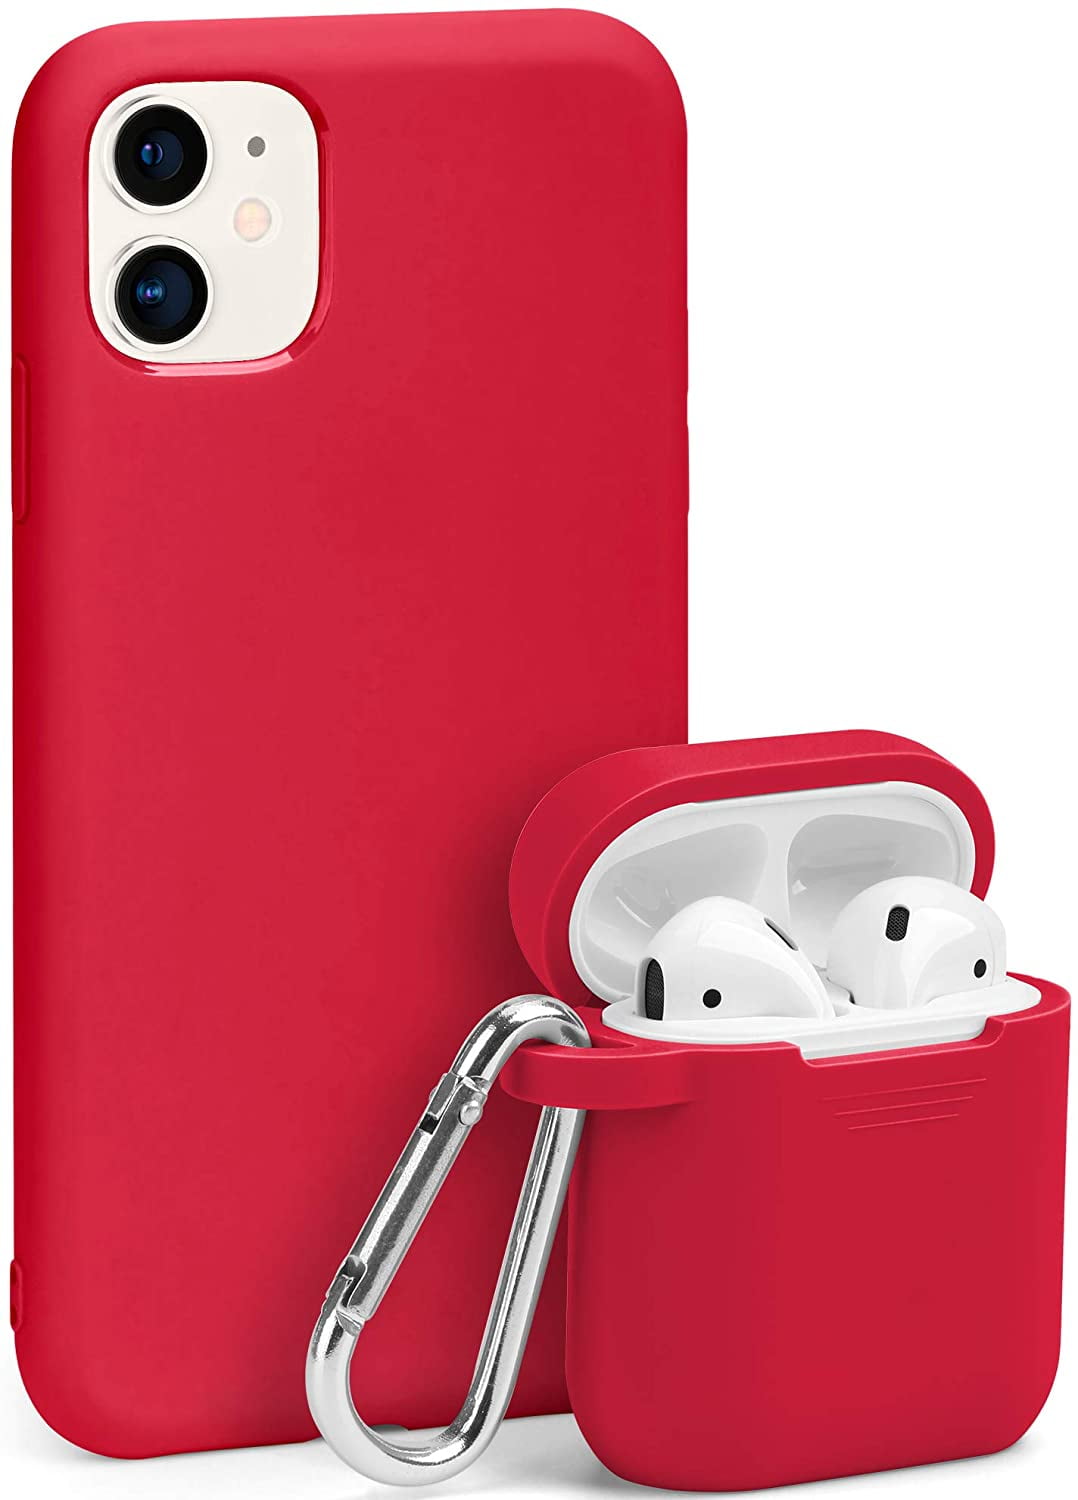 11 Case and Airpods Case Same Color Bundle Set, Silicone Thin Full Covered Camera Protection] GMYLE for Apple iPhone 11 6.1" with Airpods 1, 2 Case (True Red) - Walmart.com